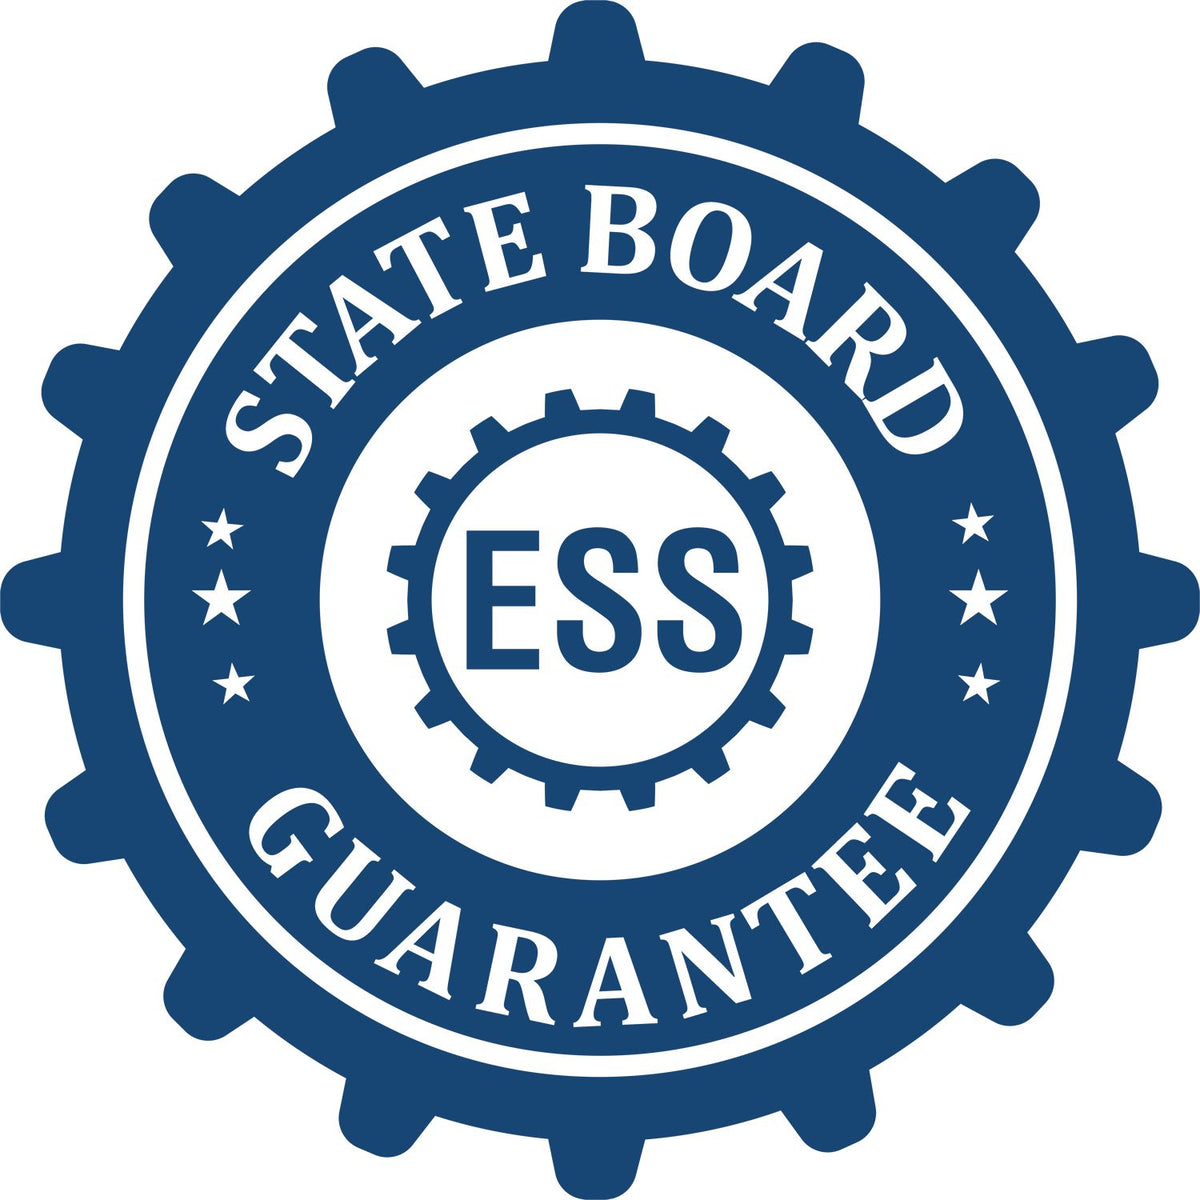 An emblem in a gear shape illustrating a state board guarantee for the Connecticut Desk Surveyor Seal Embosser product.